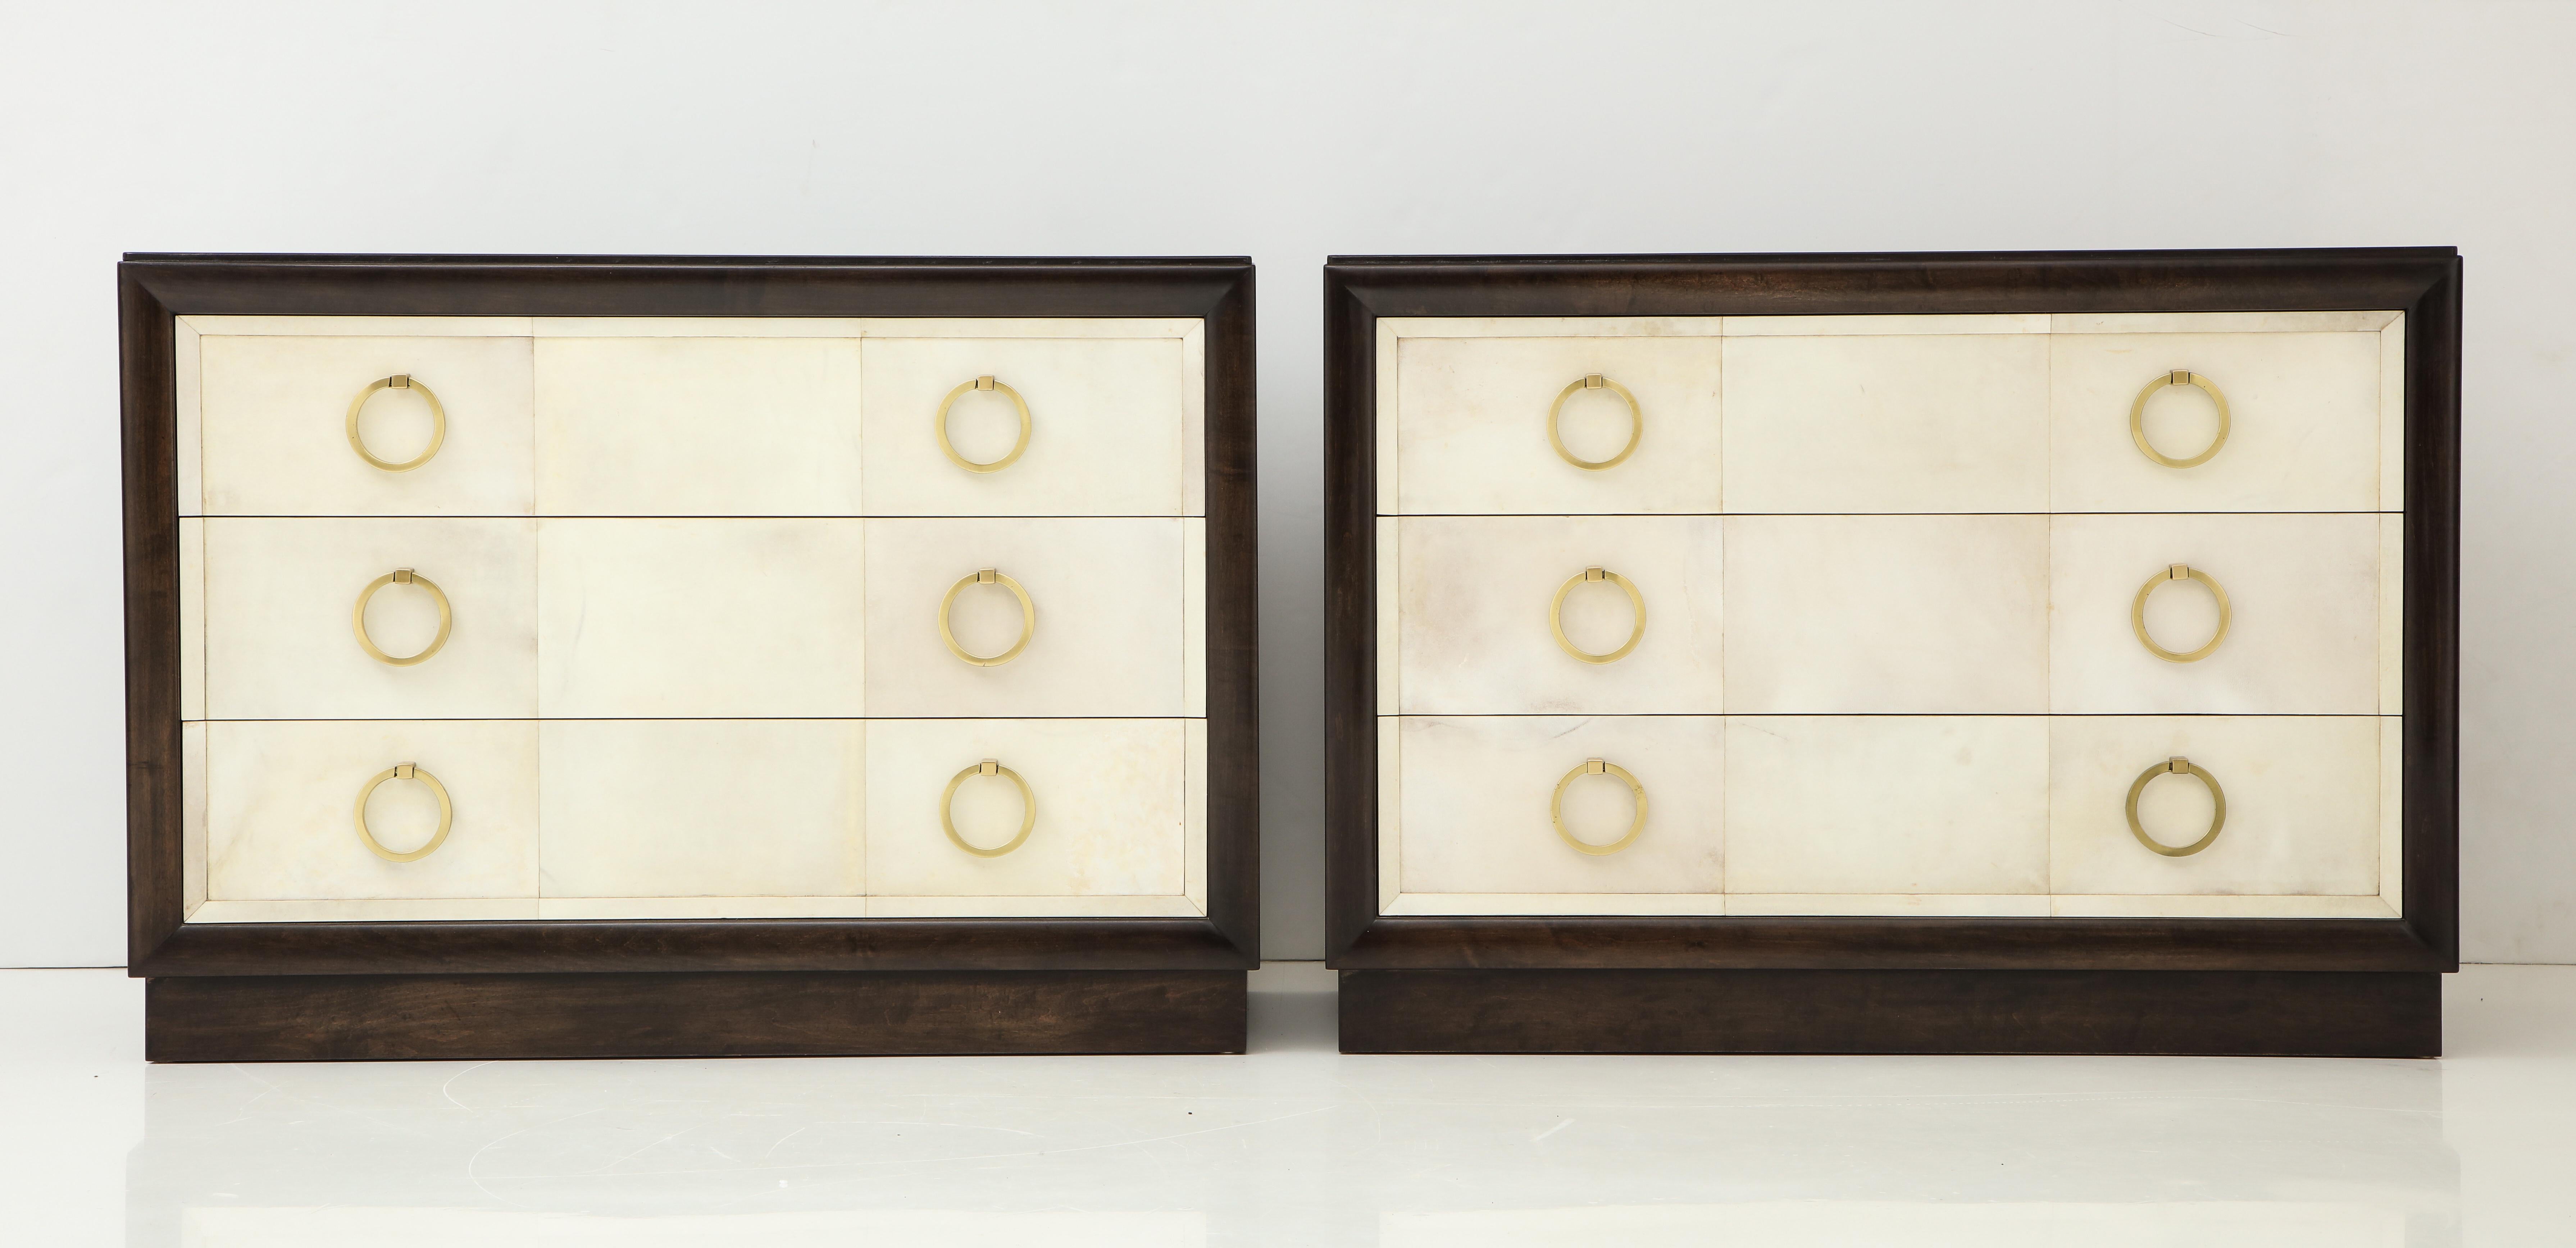 Pair of exquisite 1950s lacquered parchment dressers by T H Robsjohn Gibbings.
The rich brown Mahogany cabinets have been beautifully restored and are complemented by lacquered parchment drawer fronts and satin brass ring pulls.
 